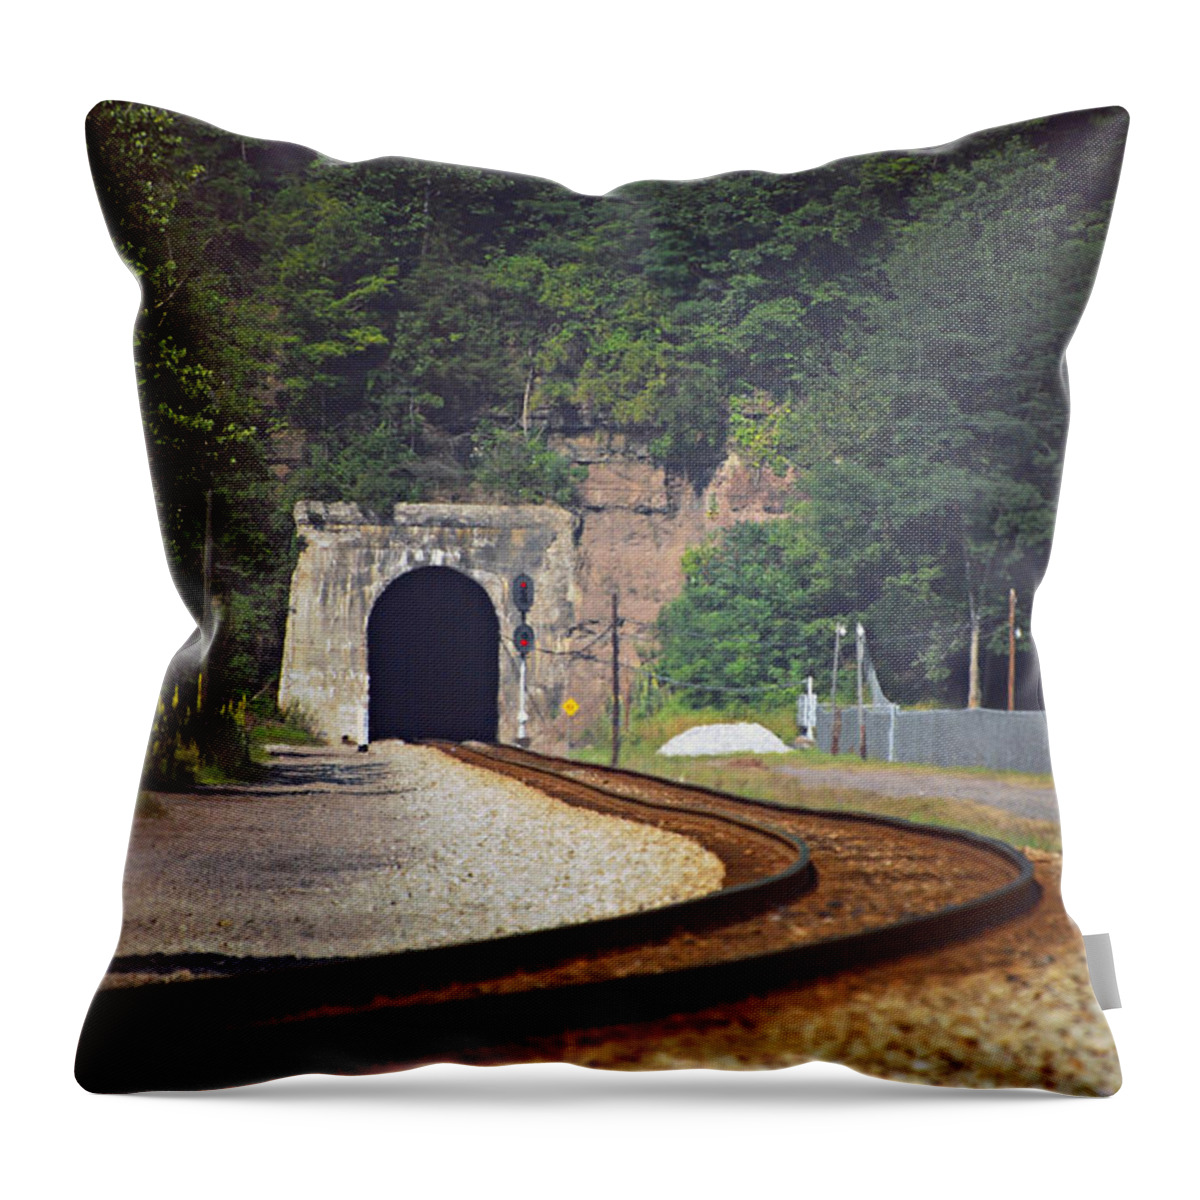 Big Bend Tunnel Throw Pillow featuring the photograph Big Bend Tunnel by Kerri Farley